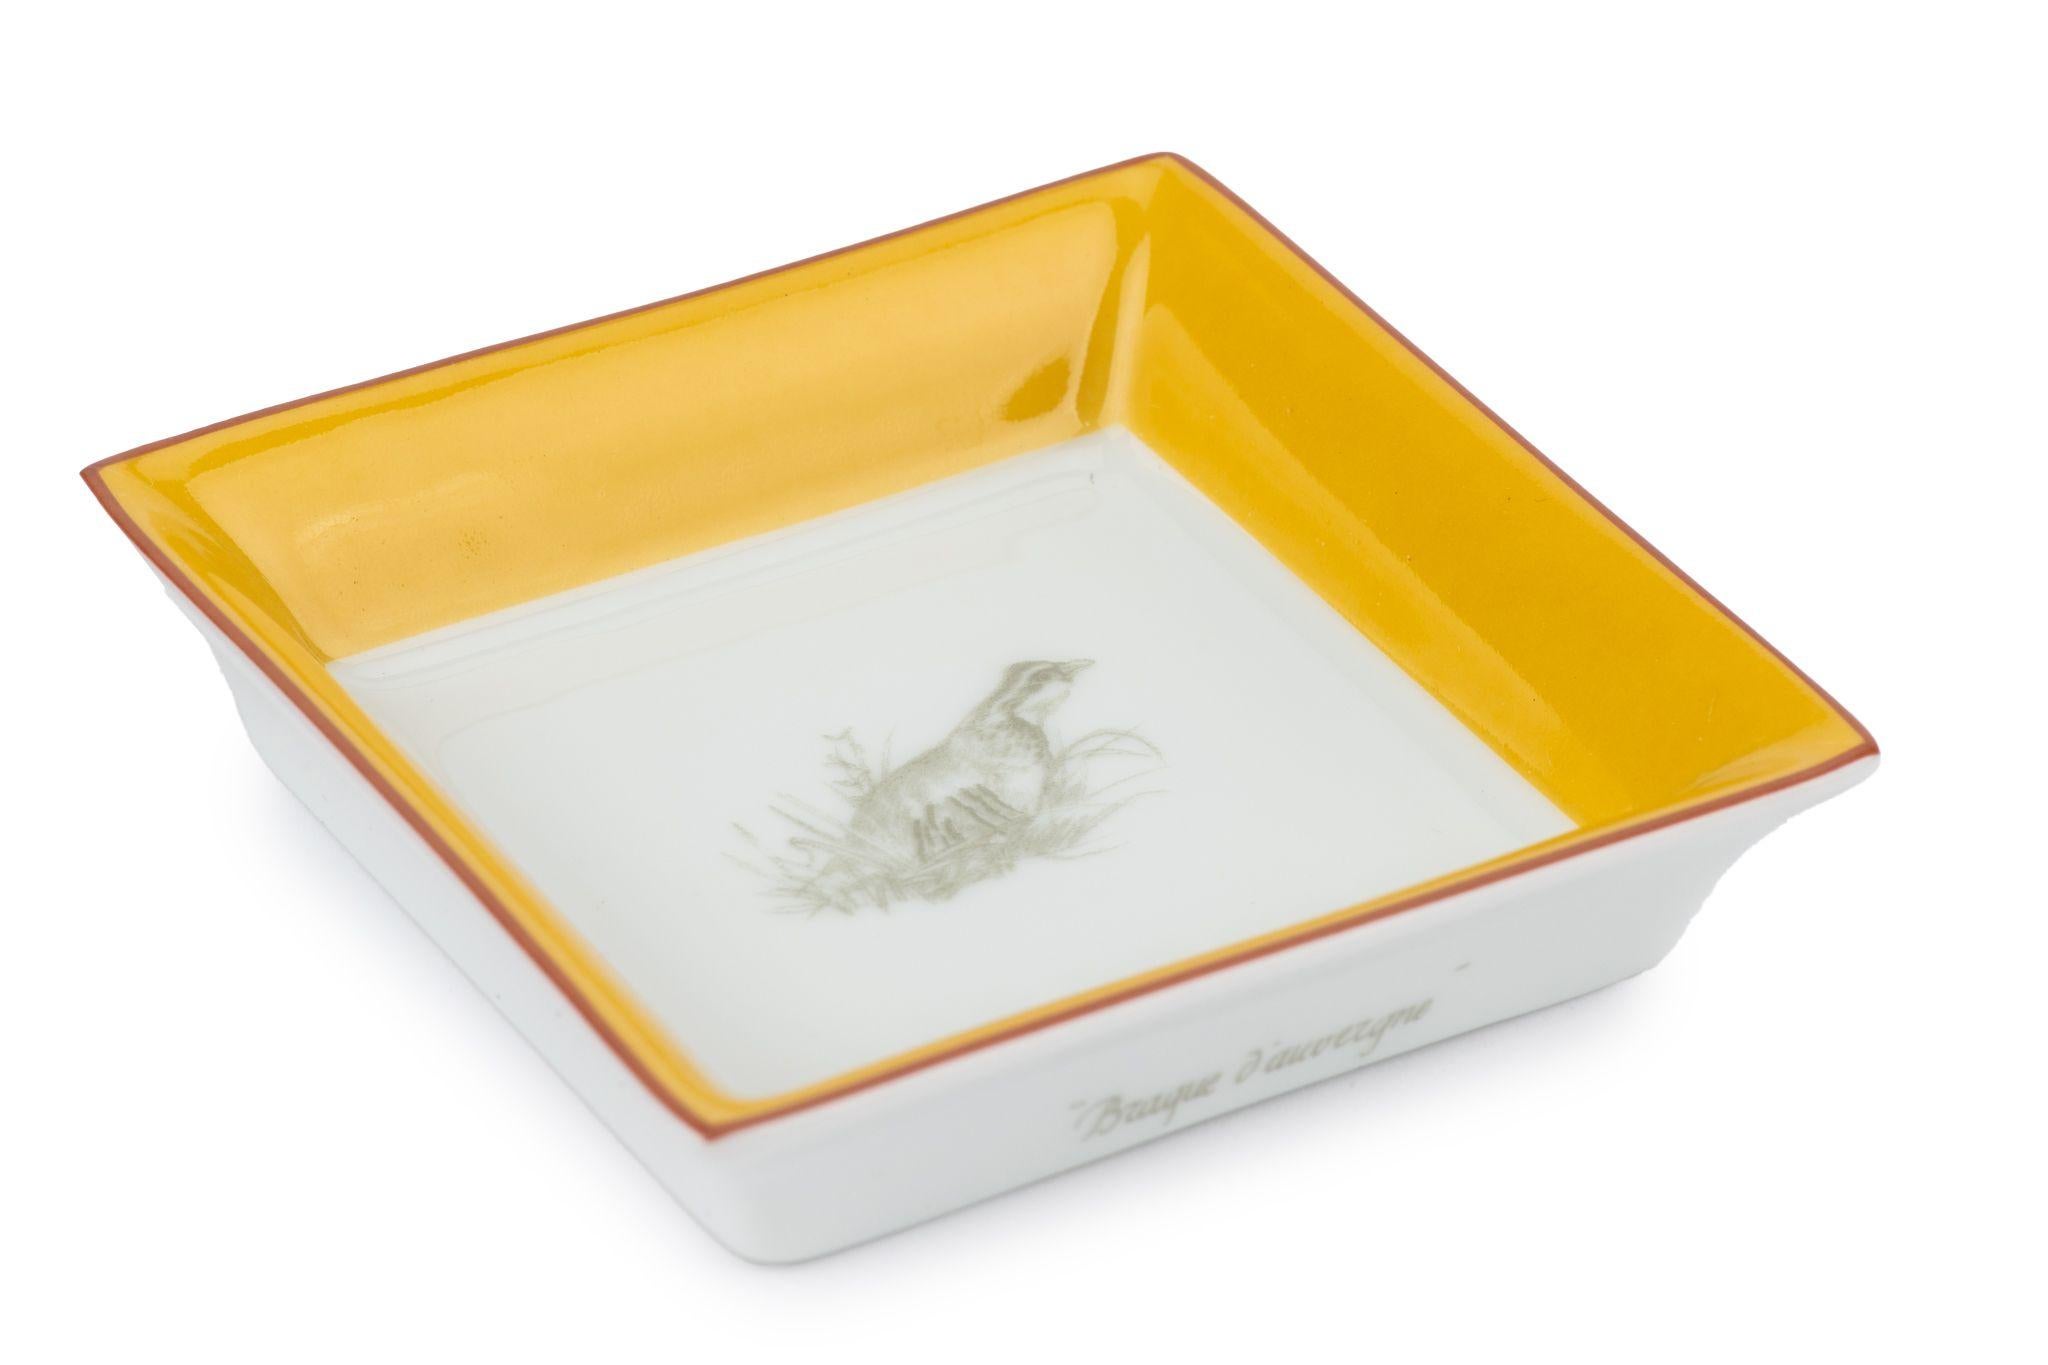 Hermès Pair Braque Vintage Mini Ashtrays In Excellent Condition For Sale In West Hollywood, CA